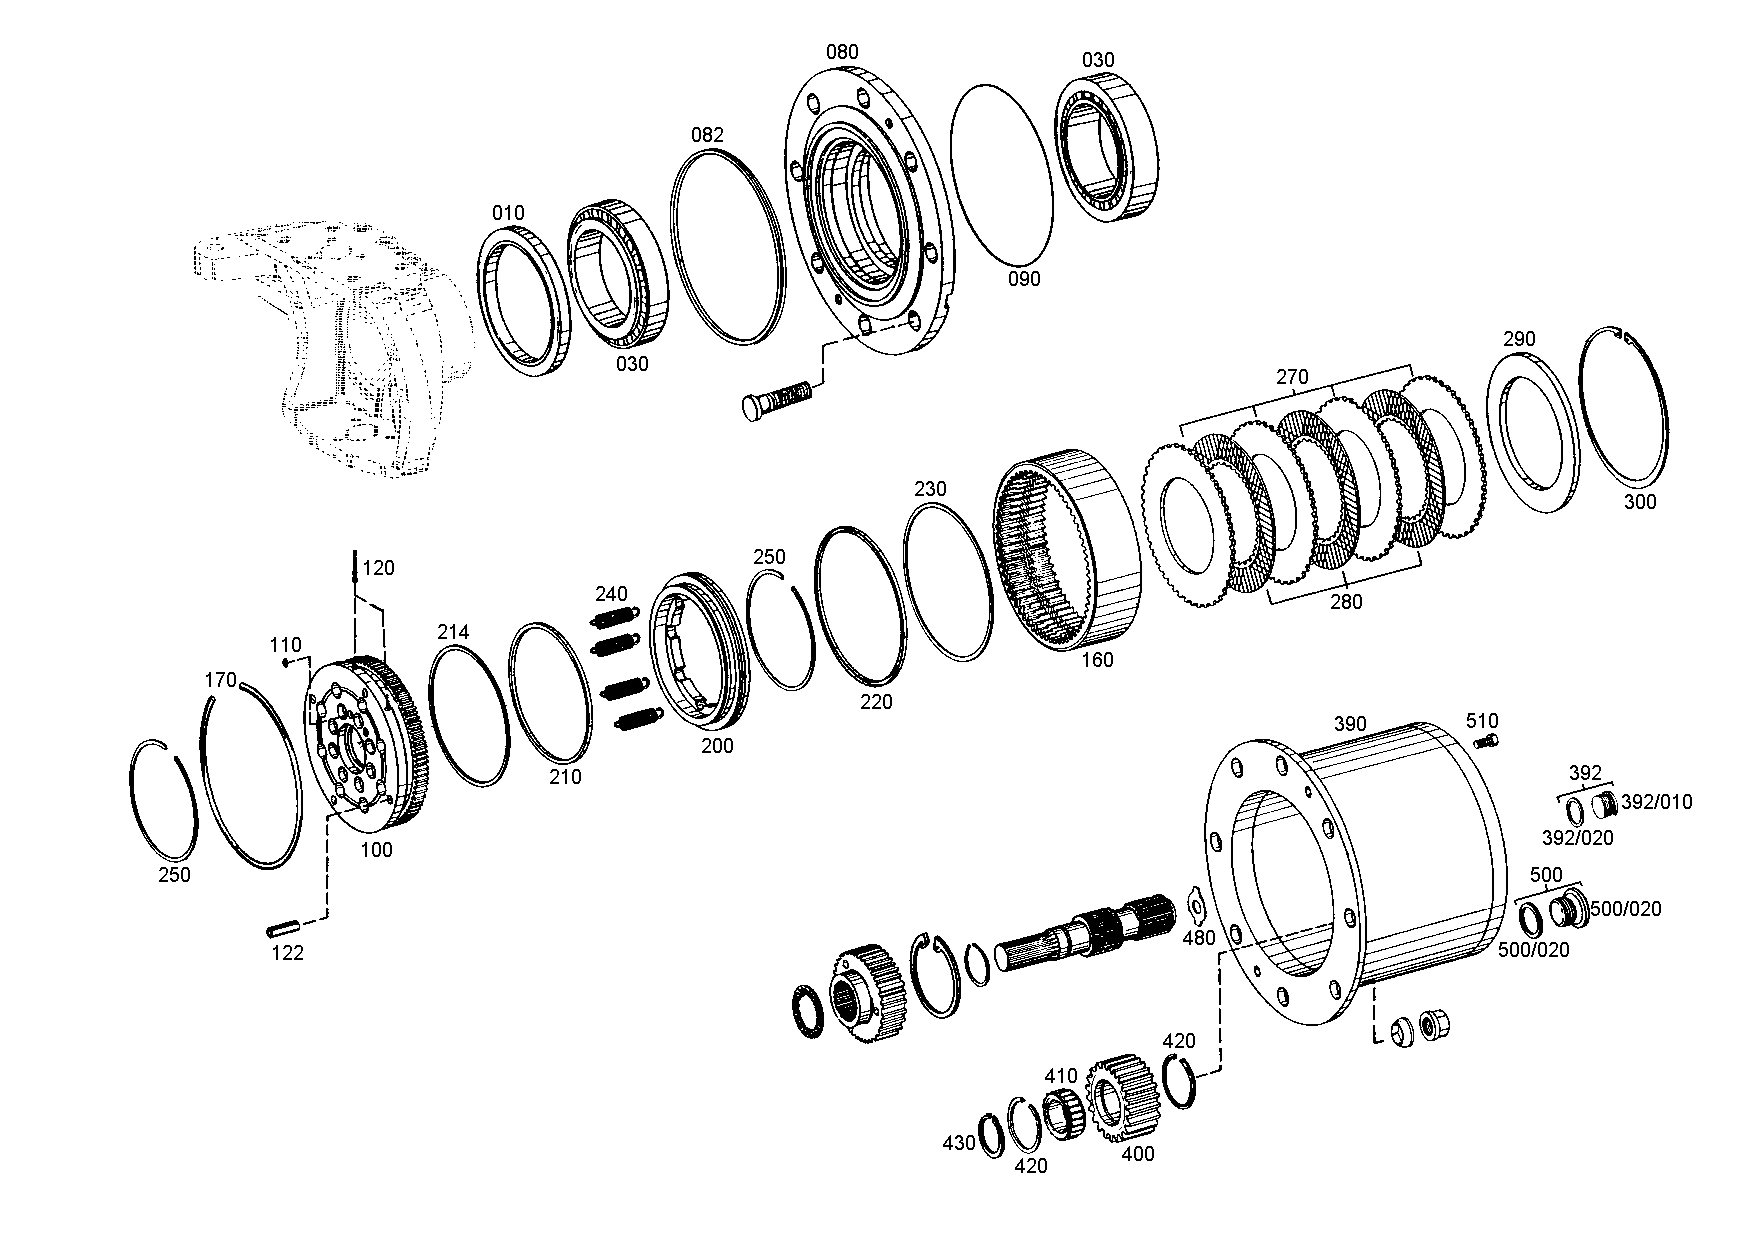 drawing for CATERPILLAR INC. 054-6549 - PLANETARY GEAR